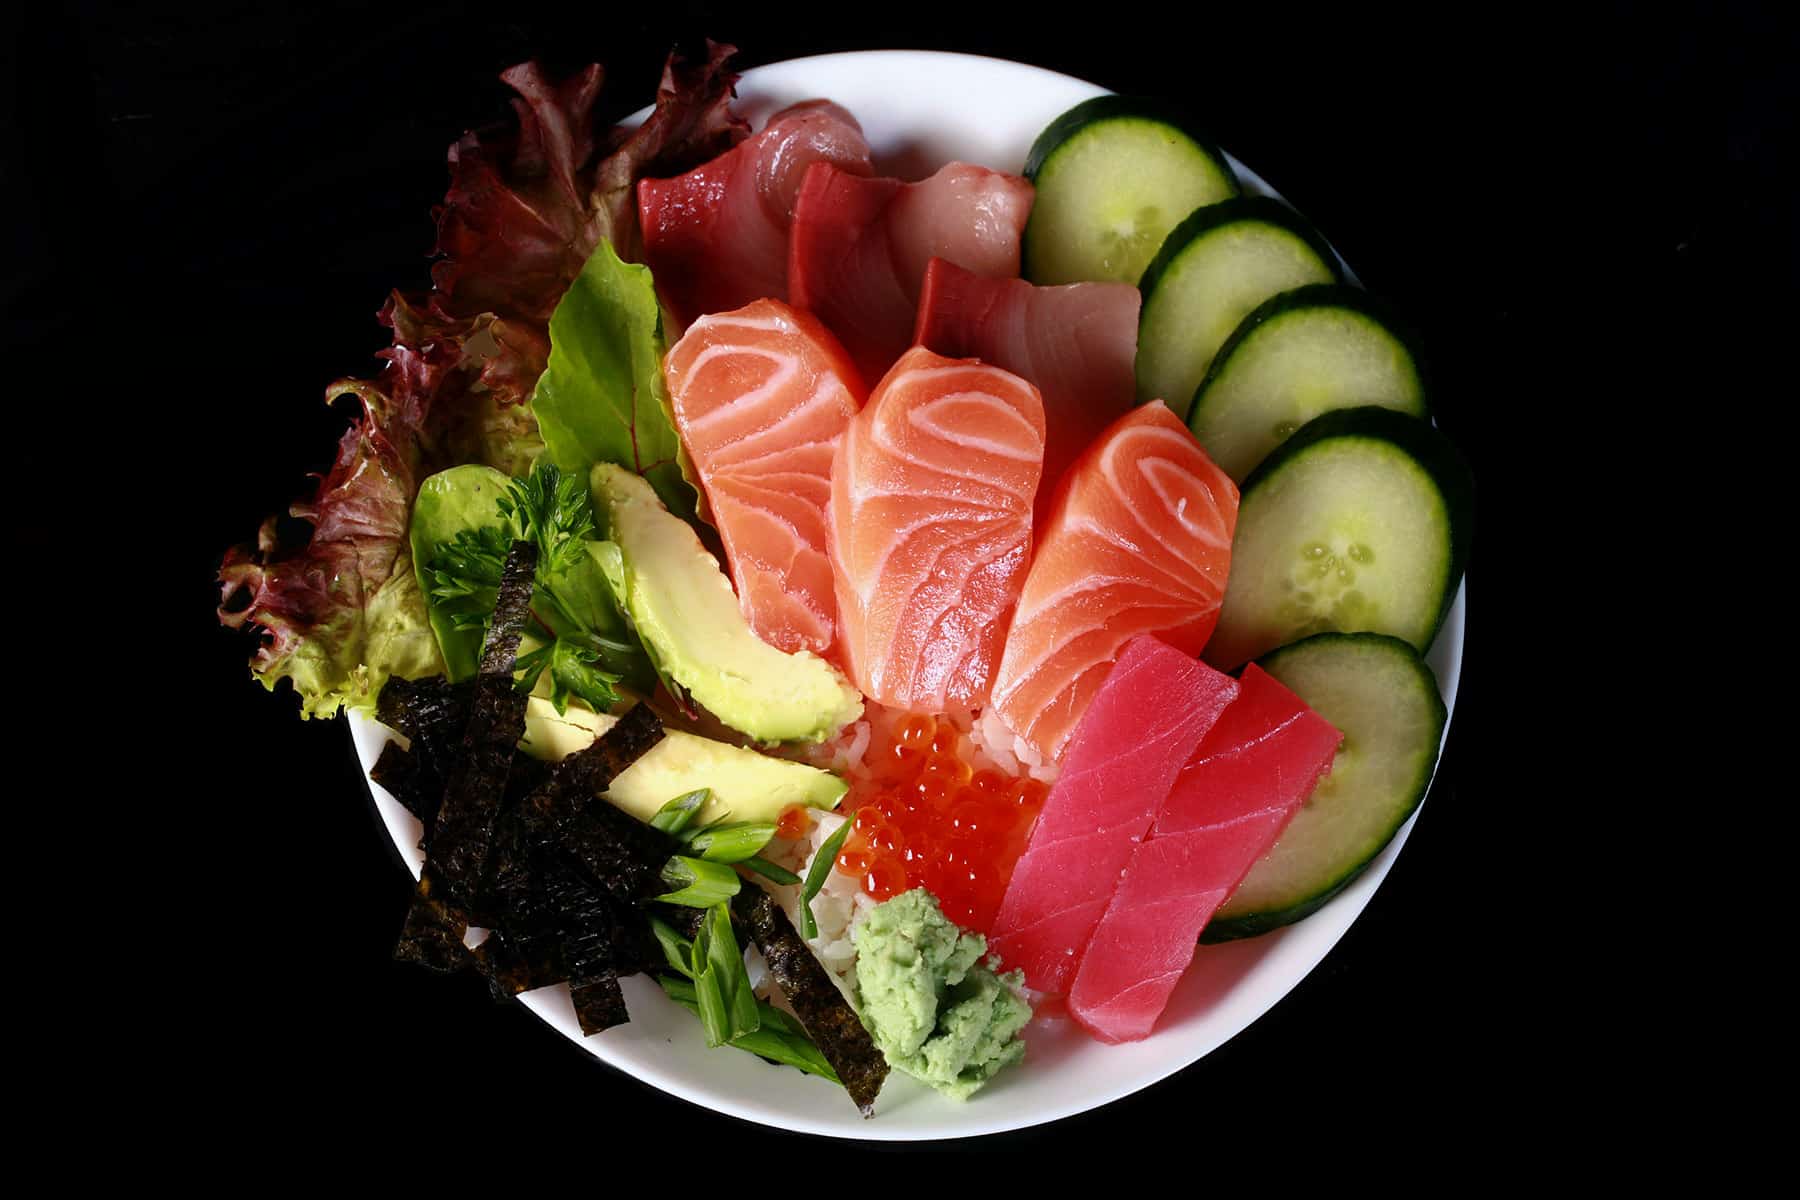 A chirashi bowl - various sashimi and vegetable pieces arranged on a bowl of cauliflower rice.